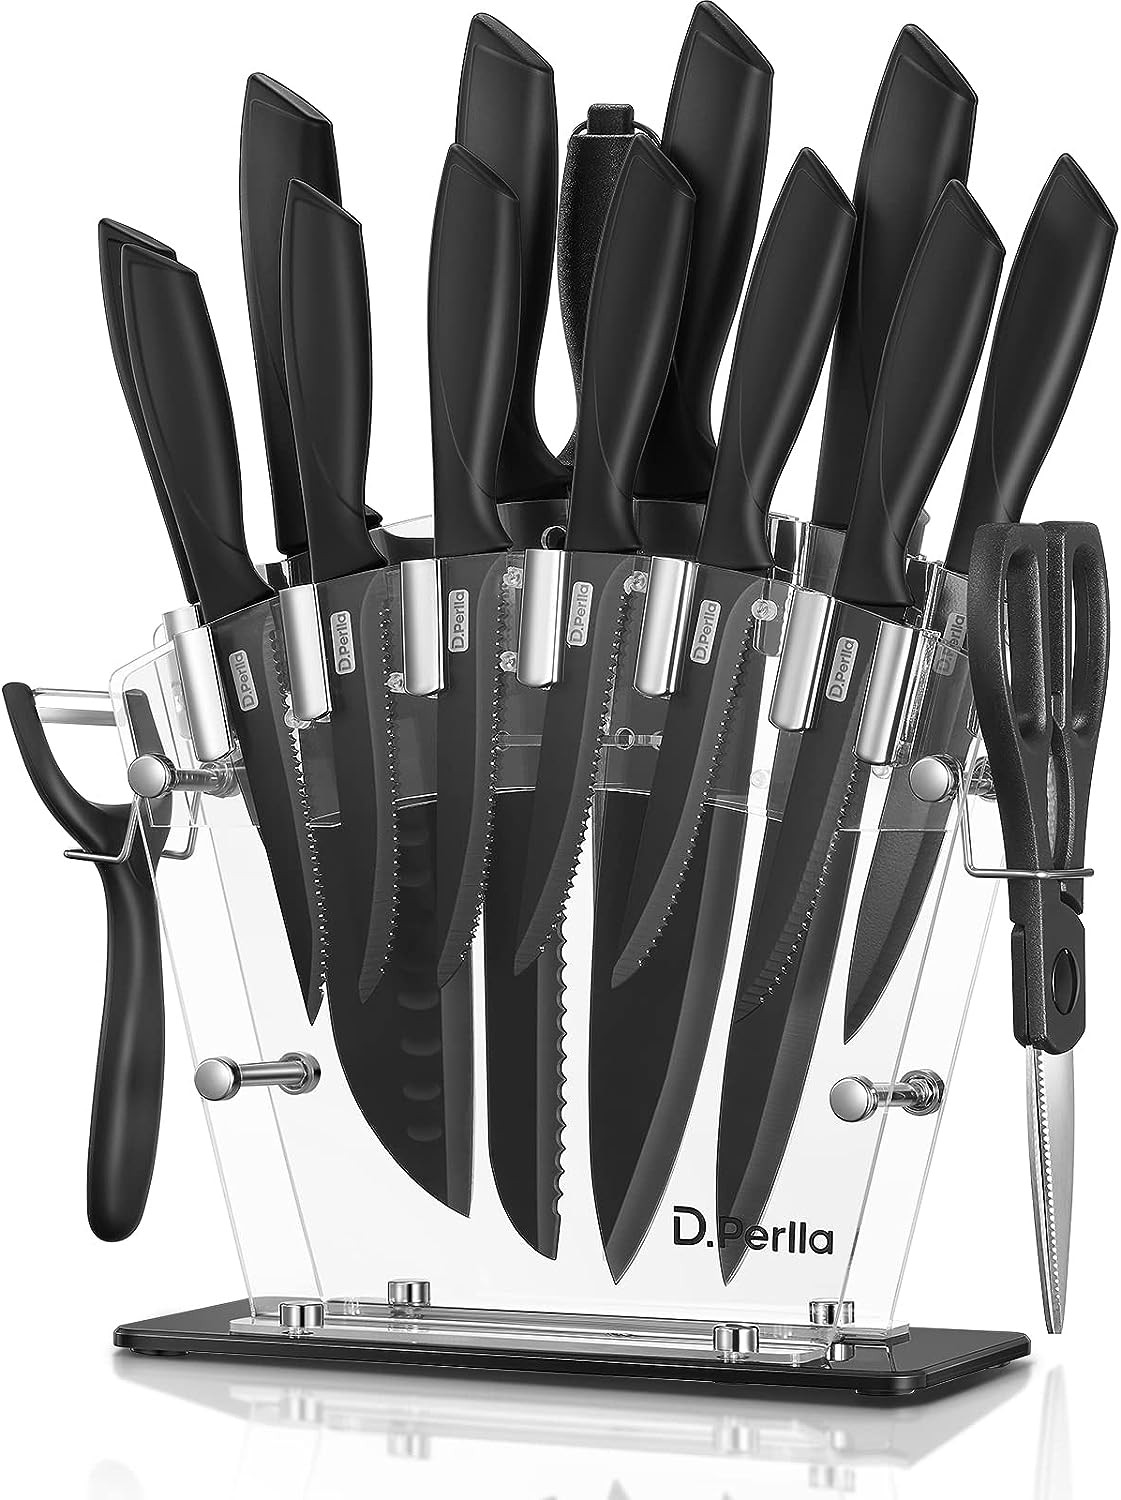 Dockorio 19 Piece High Carbon Stainless Steel Knife Block Set